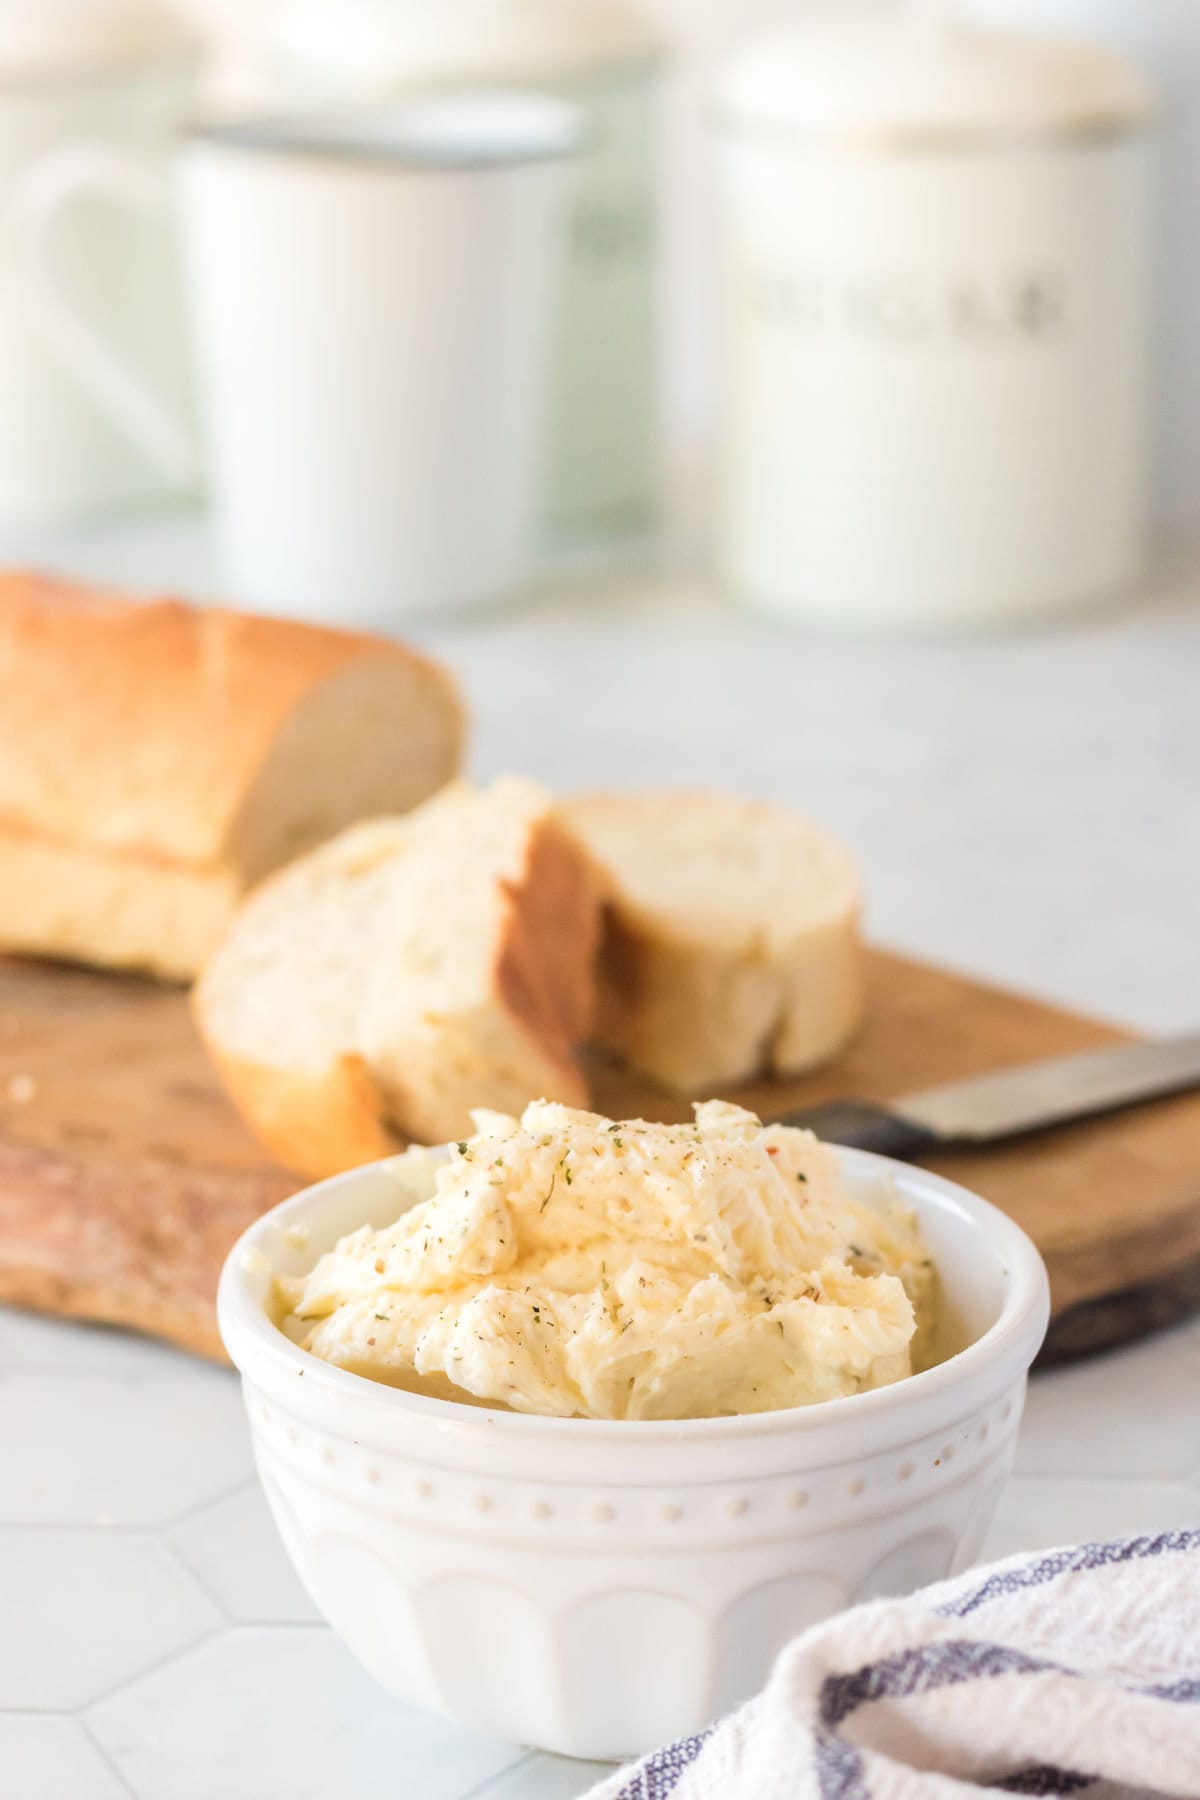 Garlic butter in a white bowl with bread and a knife behind it.